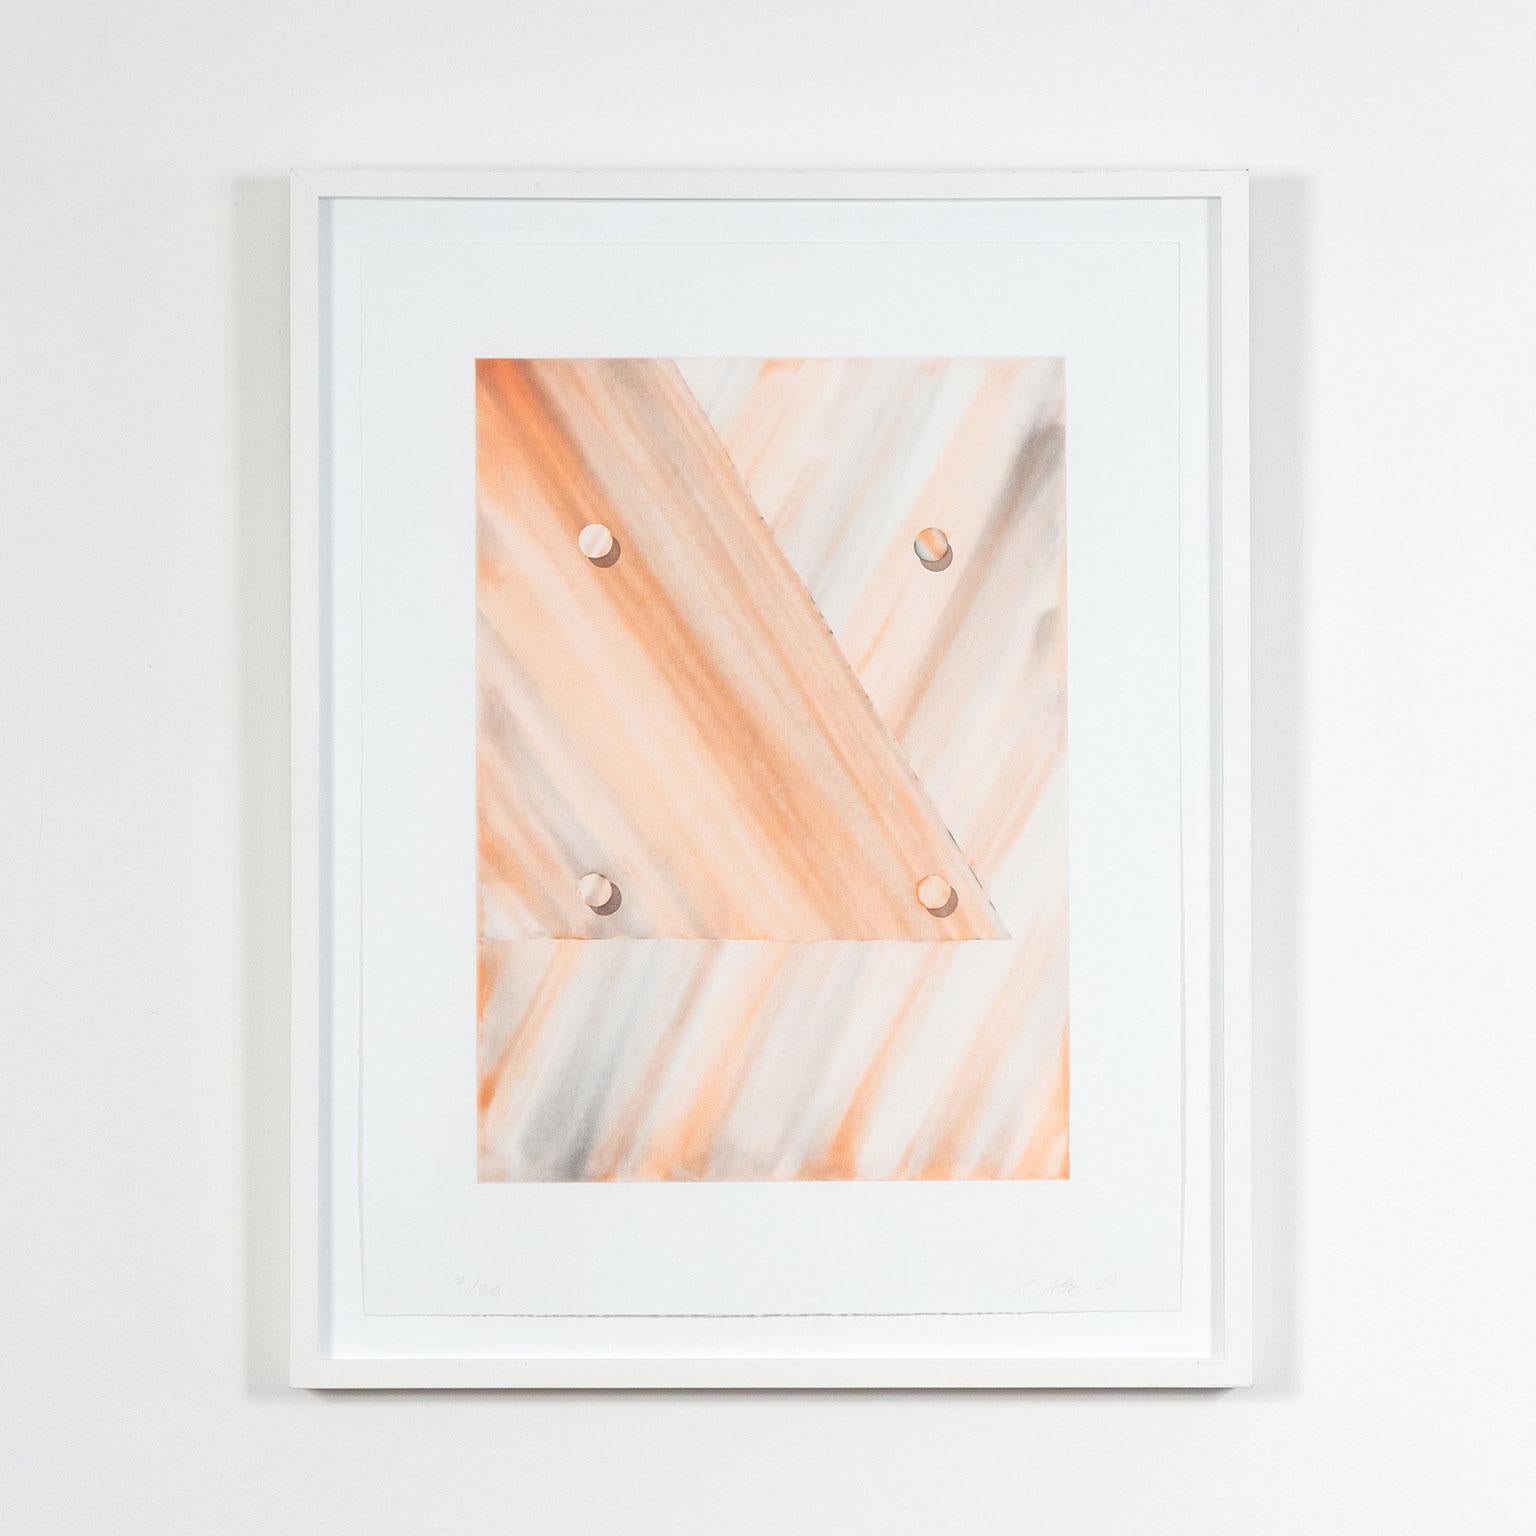 Tomma Abts Abstract Print - Untitled (Triangle)